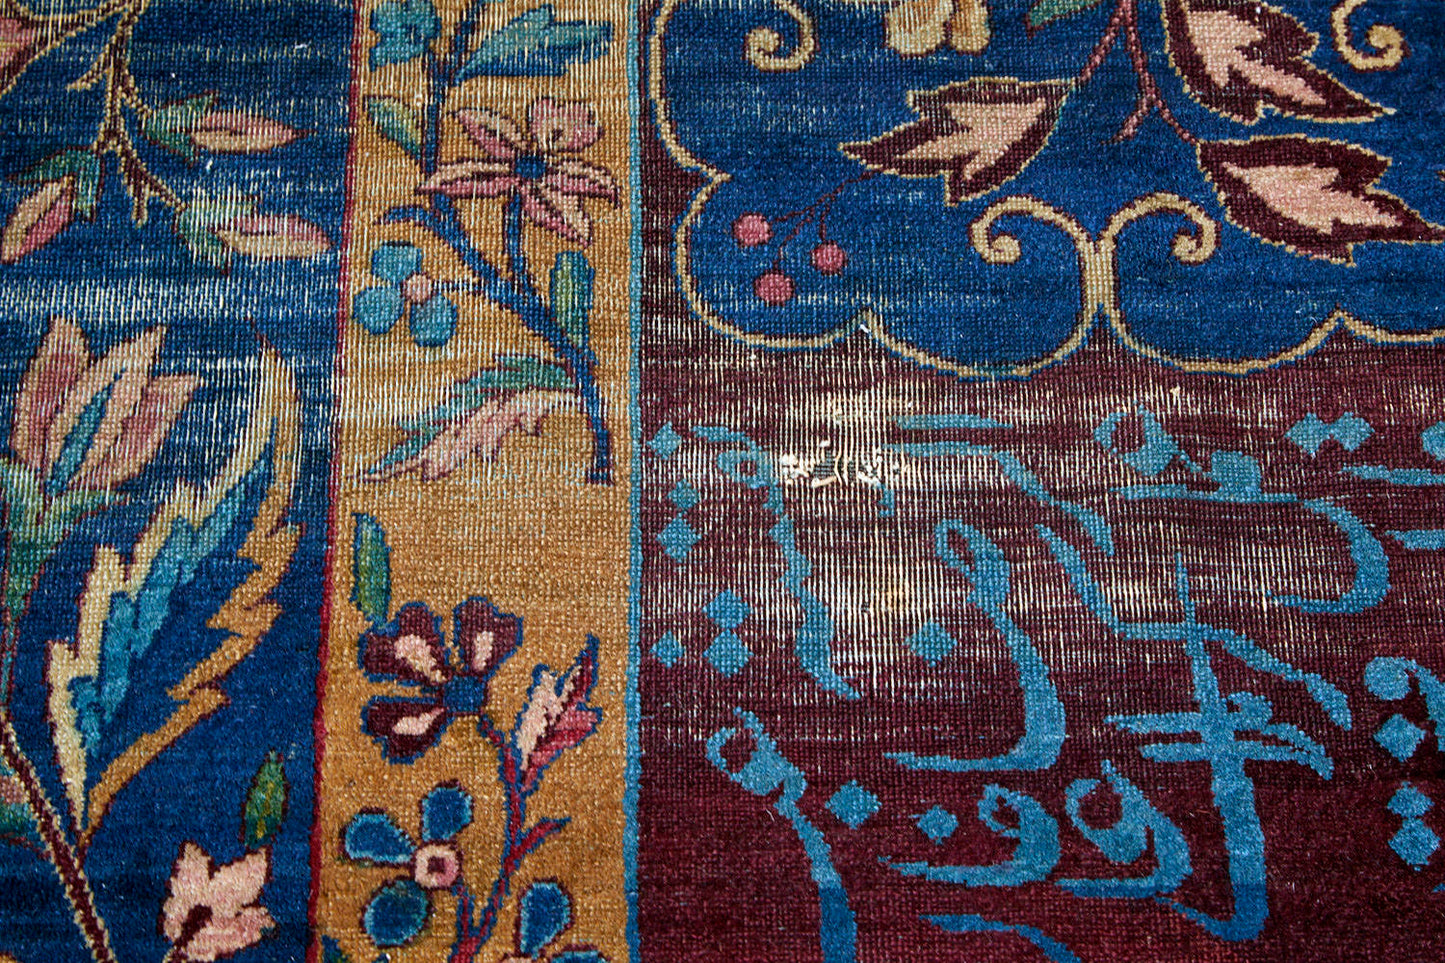 Blue Persian rug with gold and burgandy floral patterns and Arabic writing in the border, handwoven antique area rug - Available from King Kennedy Rugs Los Angeles